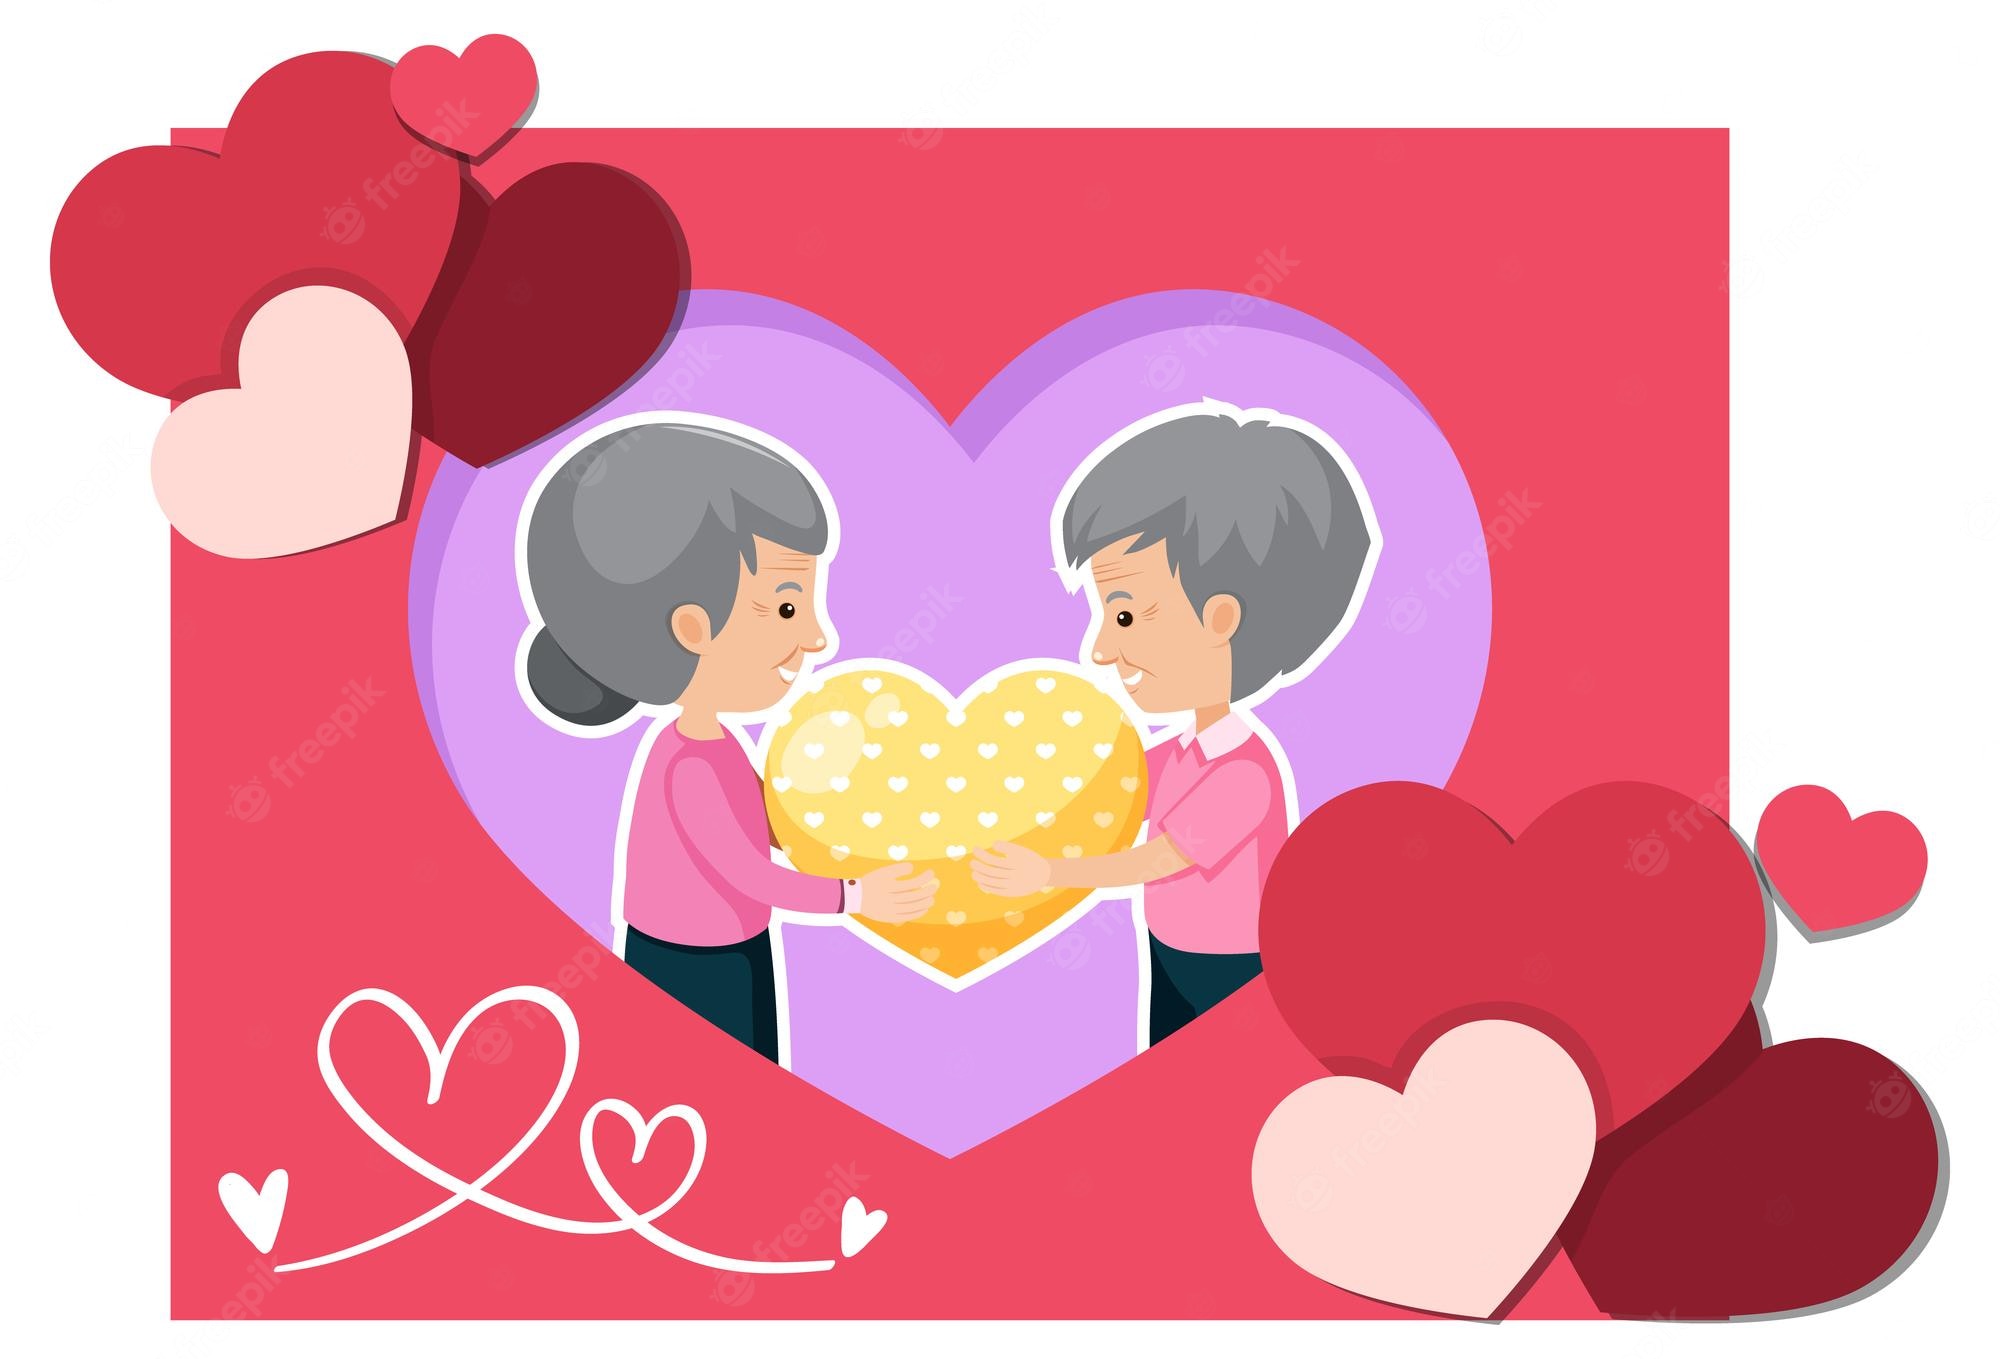 Old Couple Clipart Image. Free Vectors, & PSD